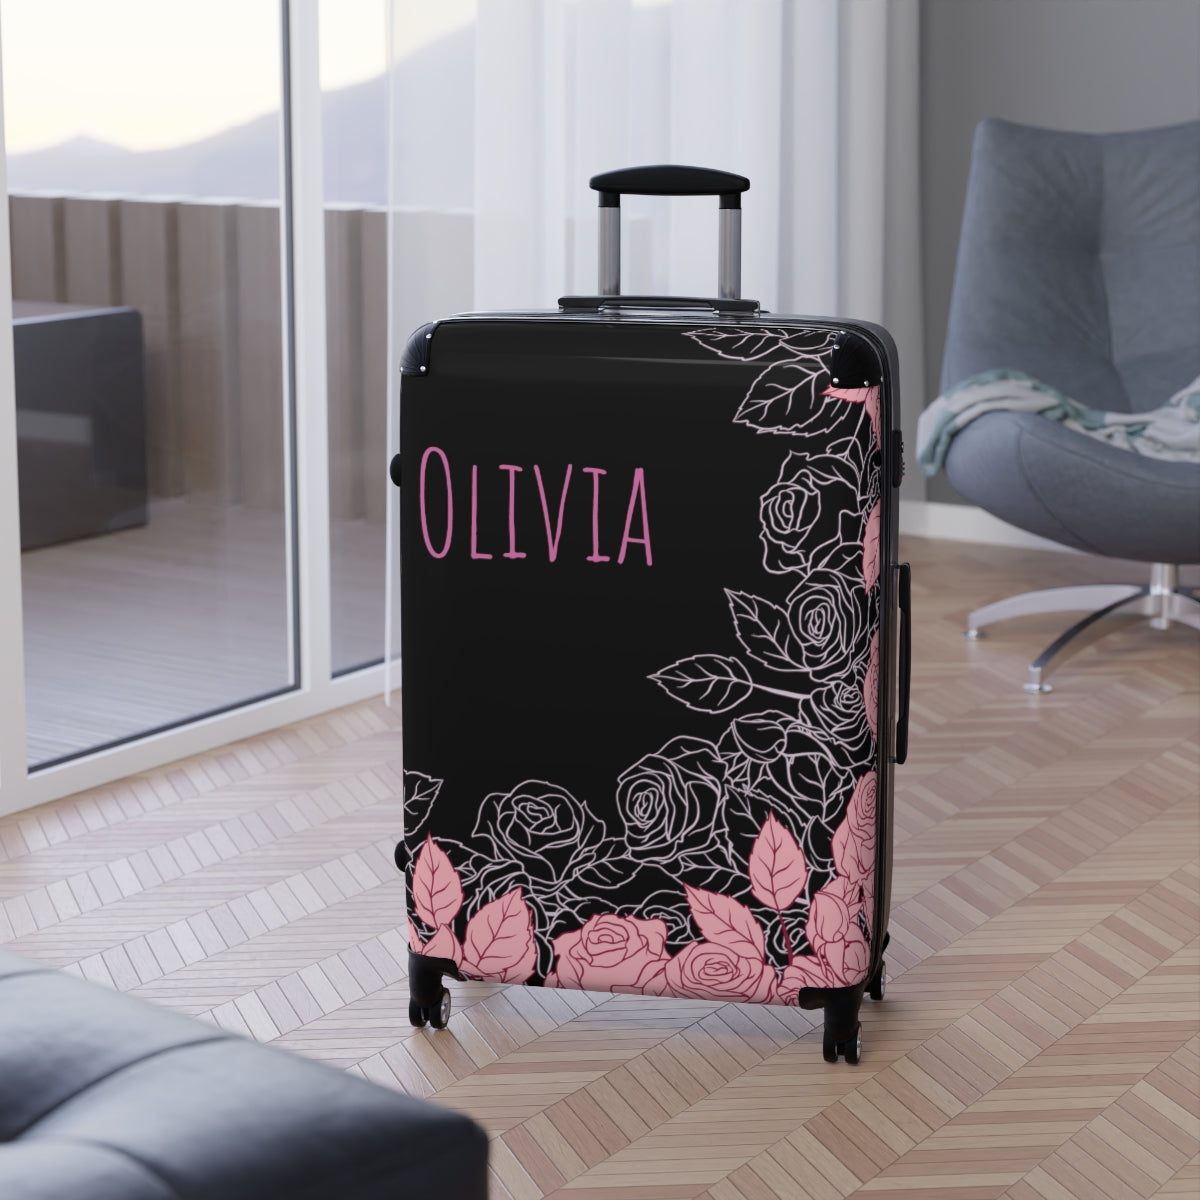 PINK ROSES SUITCASES LUGGAGE by Artzira, All Sizes, Artistic Designs, Double Wheeled Spinner